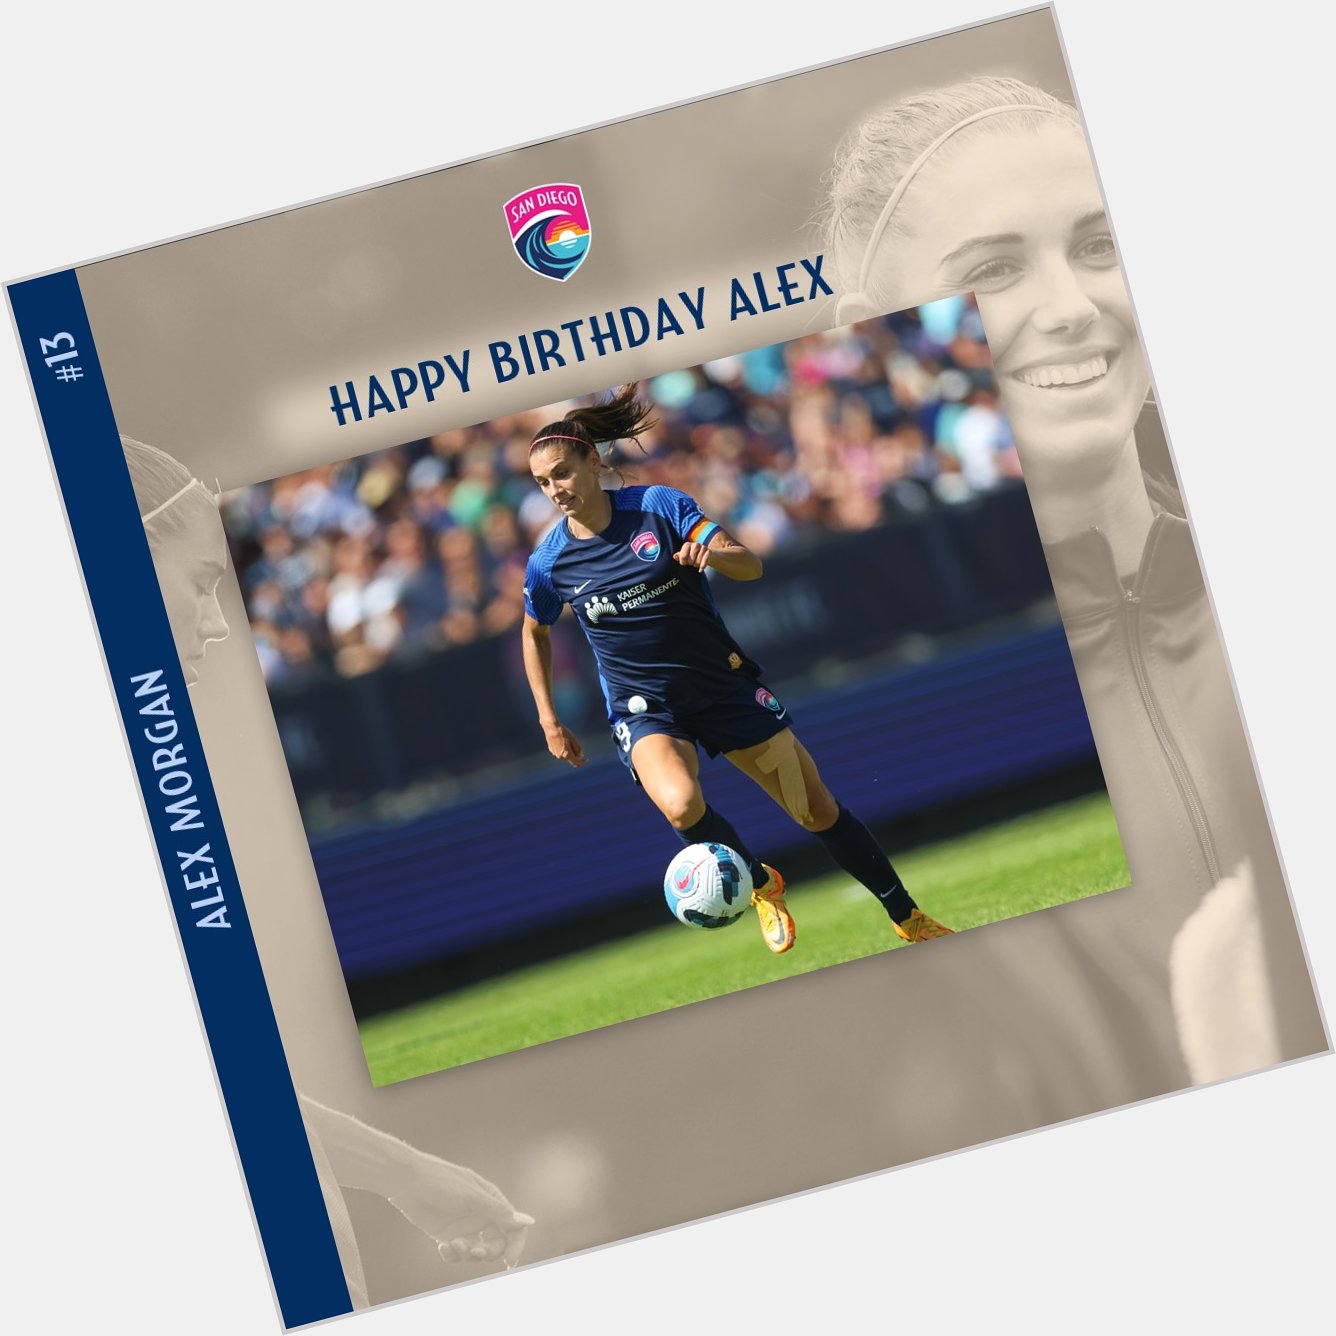 Join us in wishing a very happy birthday to our captain, Alex Morgan!  